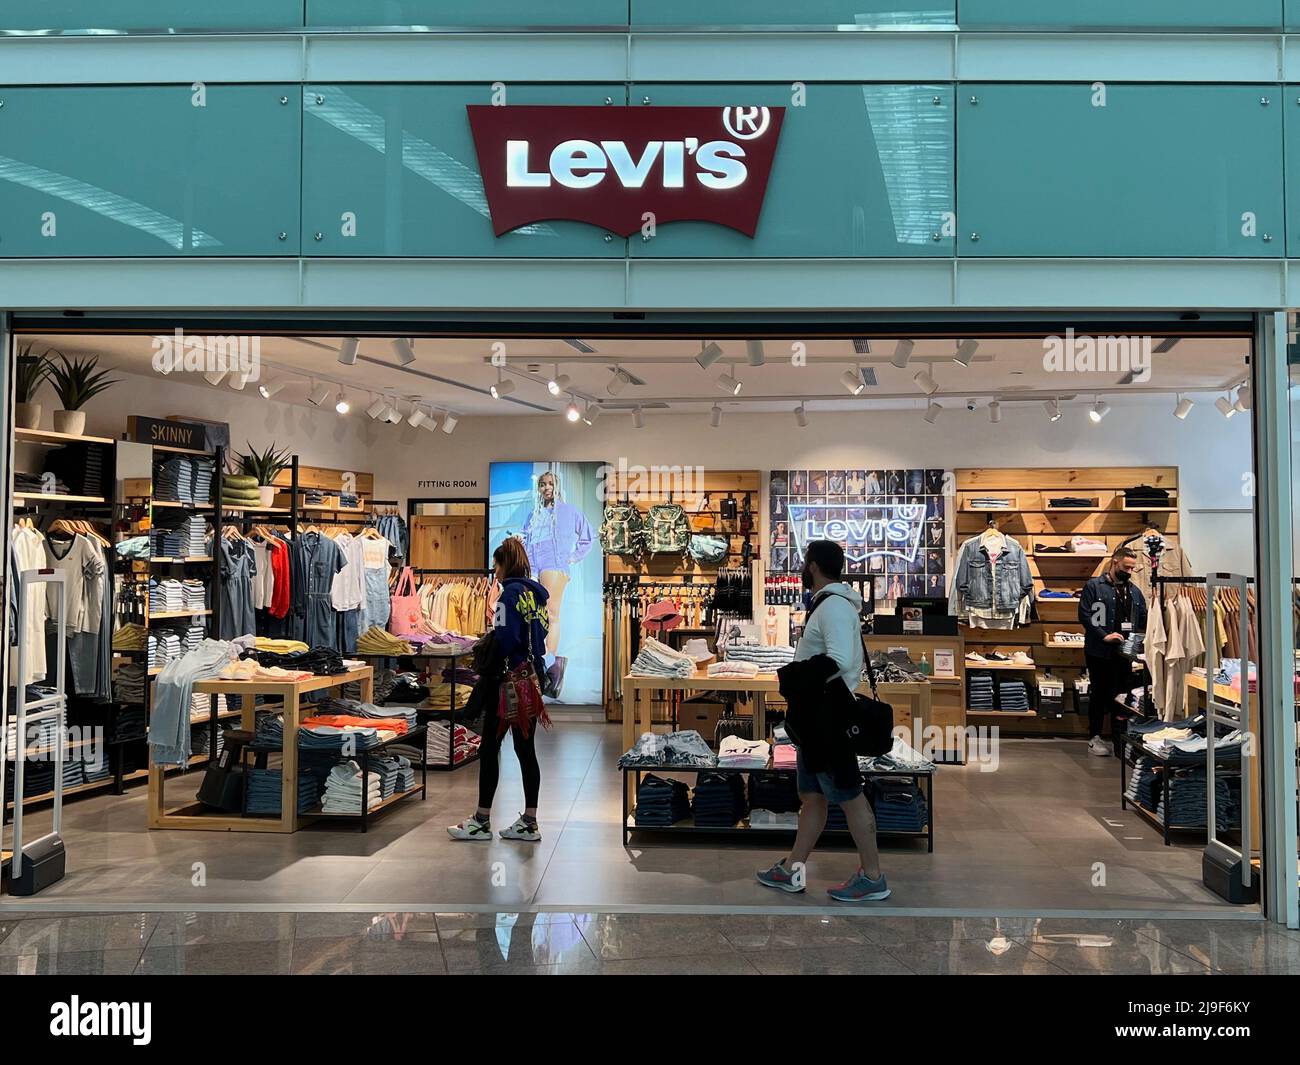 Barcelona, Spain. 21st May, 2022. The Levi's store at Terminal 1 at Josep  Tarradellas Barcelona-El Prat Airport (BCN) on May 21, 2022. The airport is  commonly known as Barcelona Airport or El